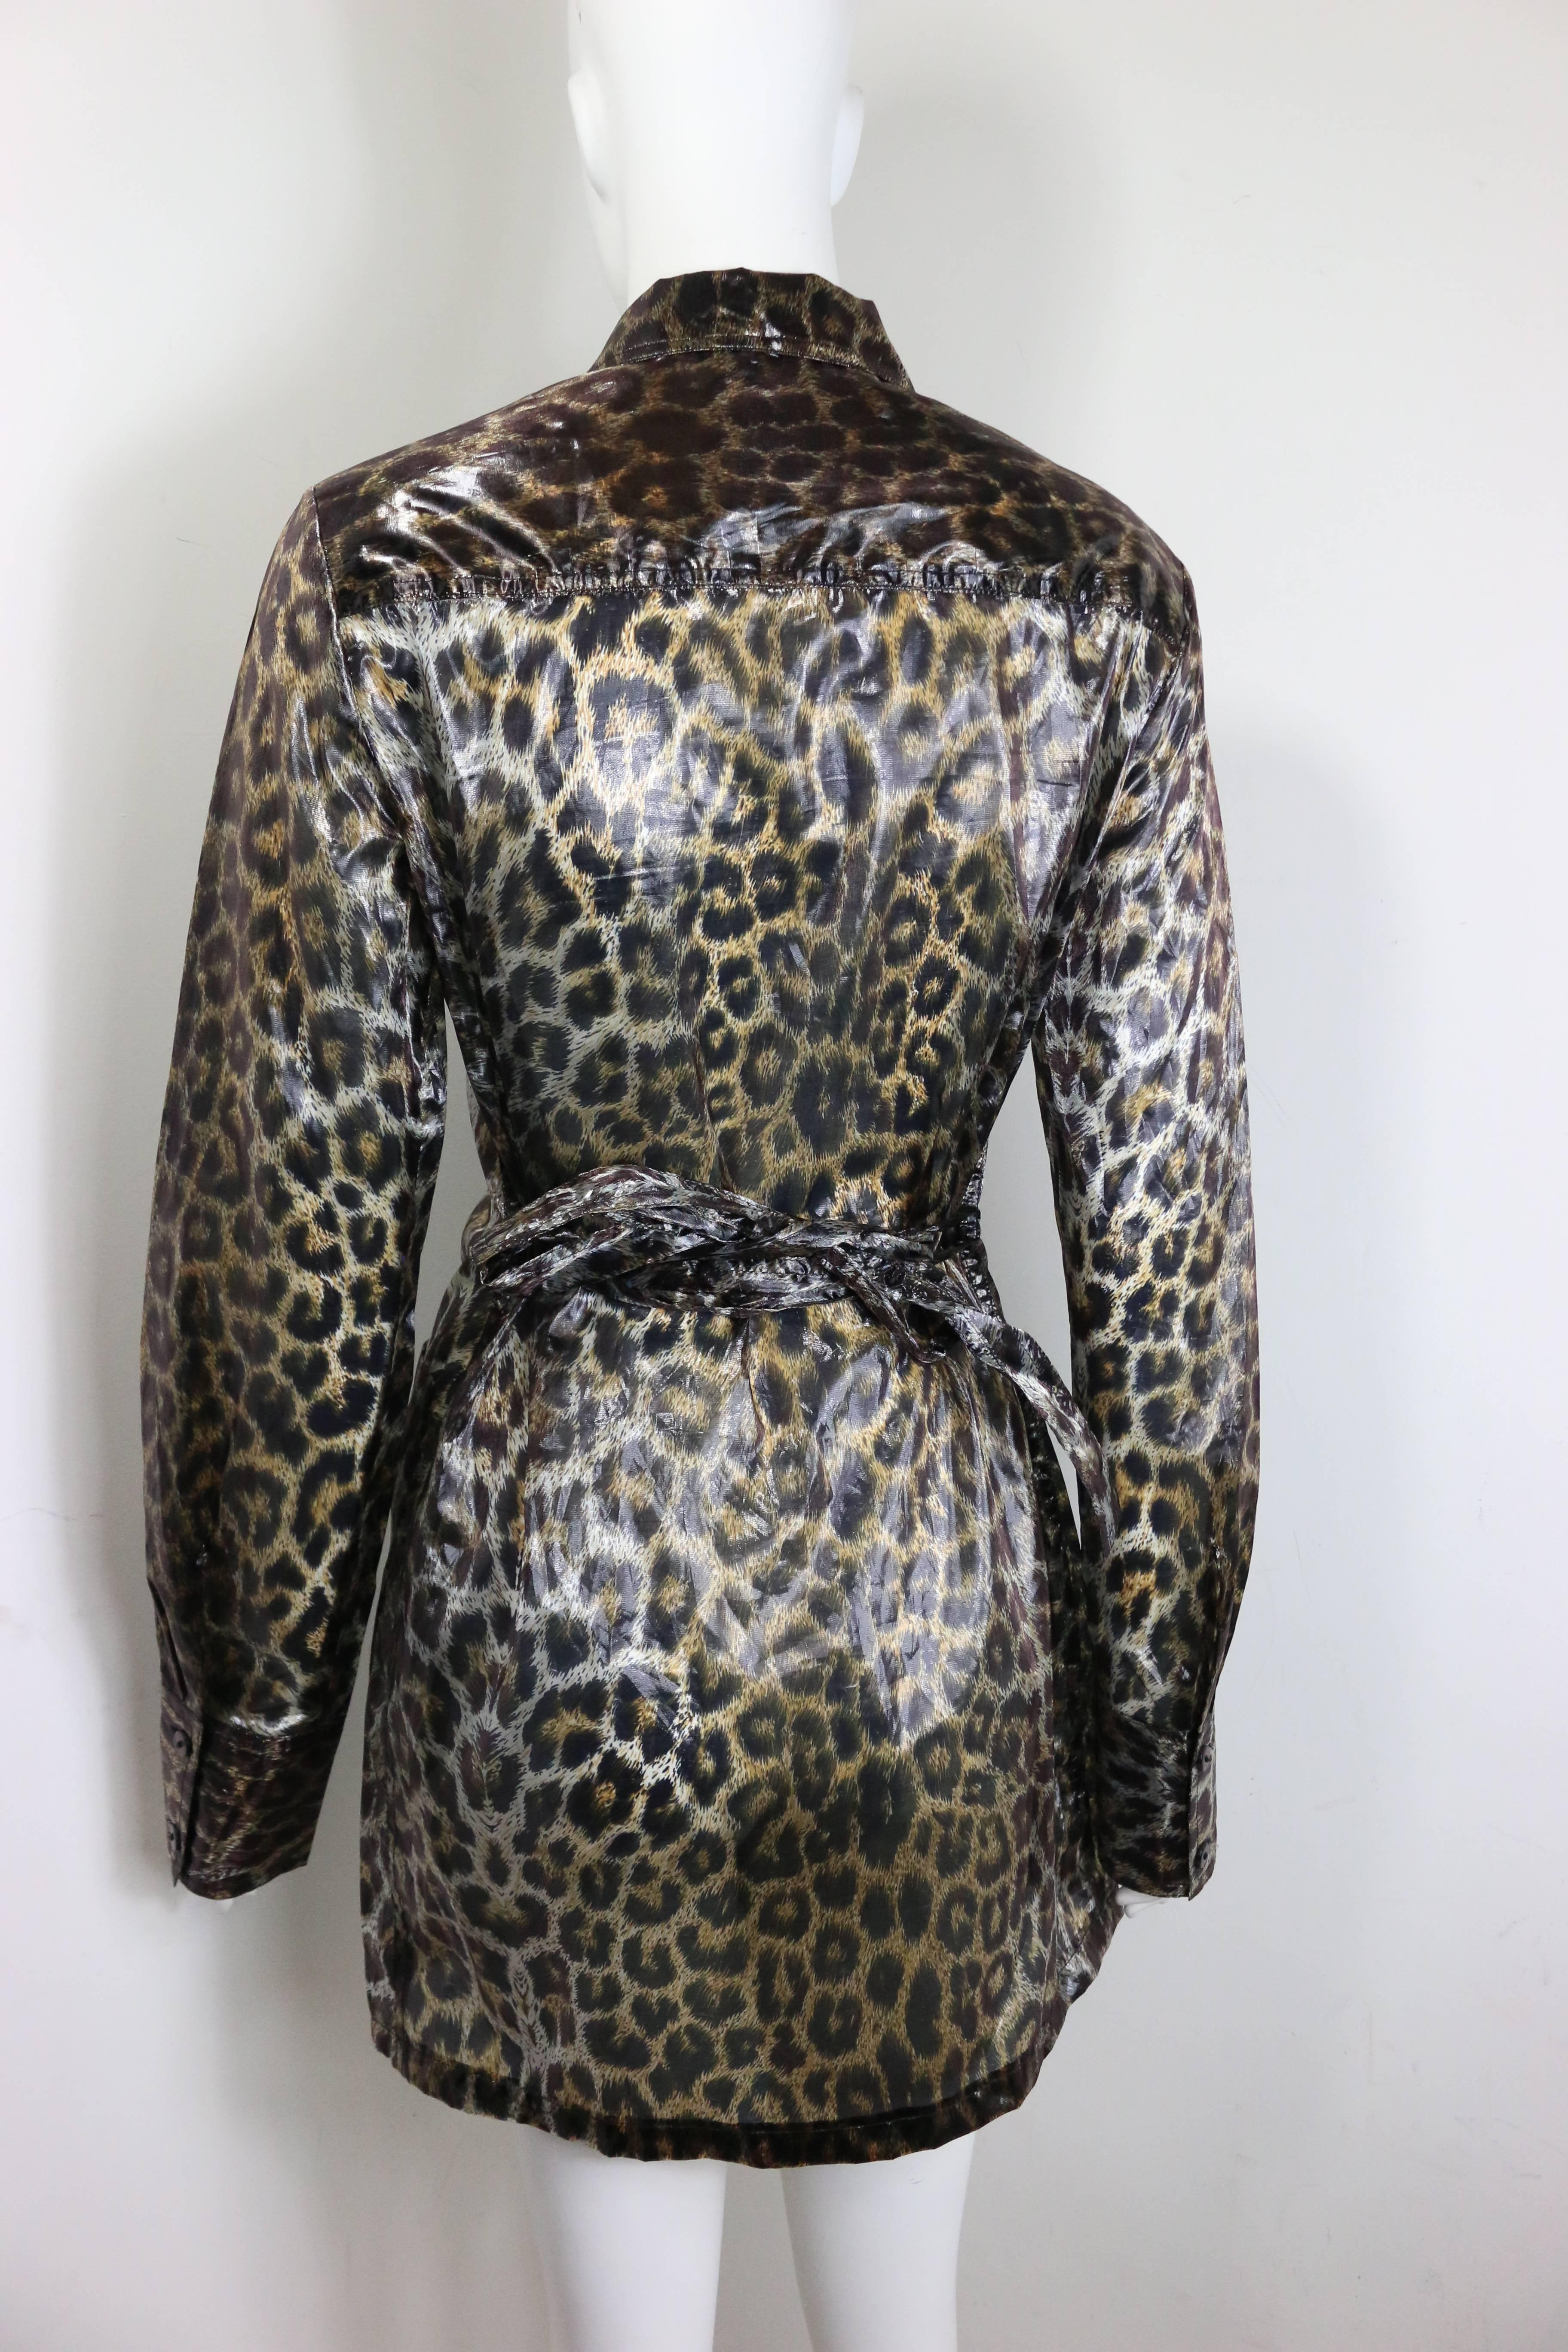 - Vintage 90s Plein Sud leopard print belted jacket. Featuring nine buttons fastening, two buttons closure on each cuff and  four front pockets. This interesting jacket is made in polyester and nylon. Shiny and thin fabric that you can see through